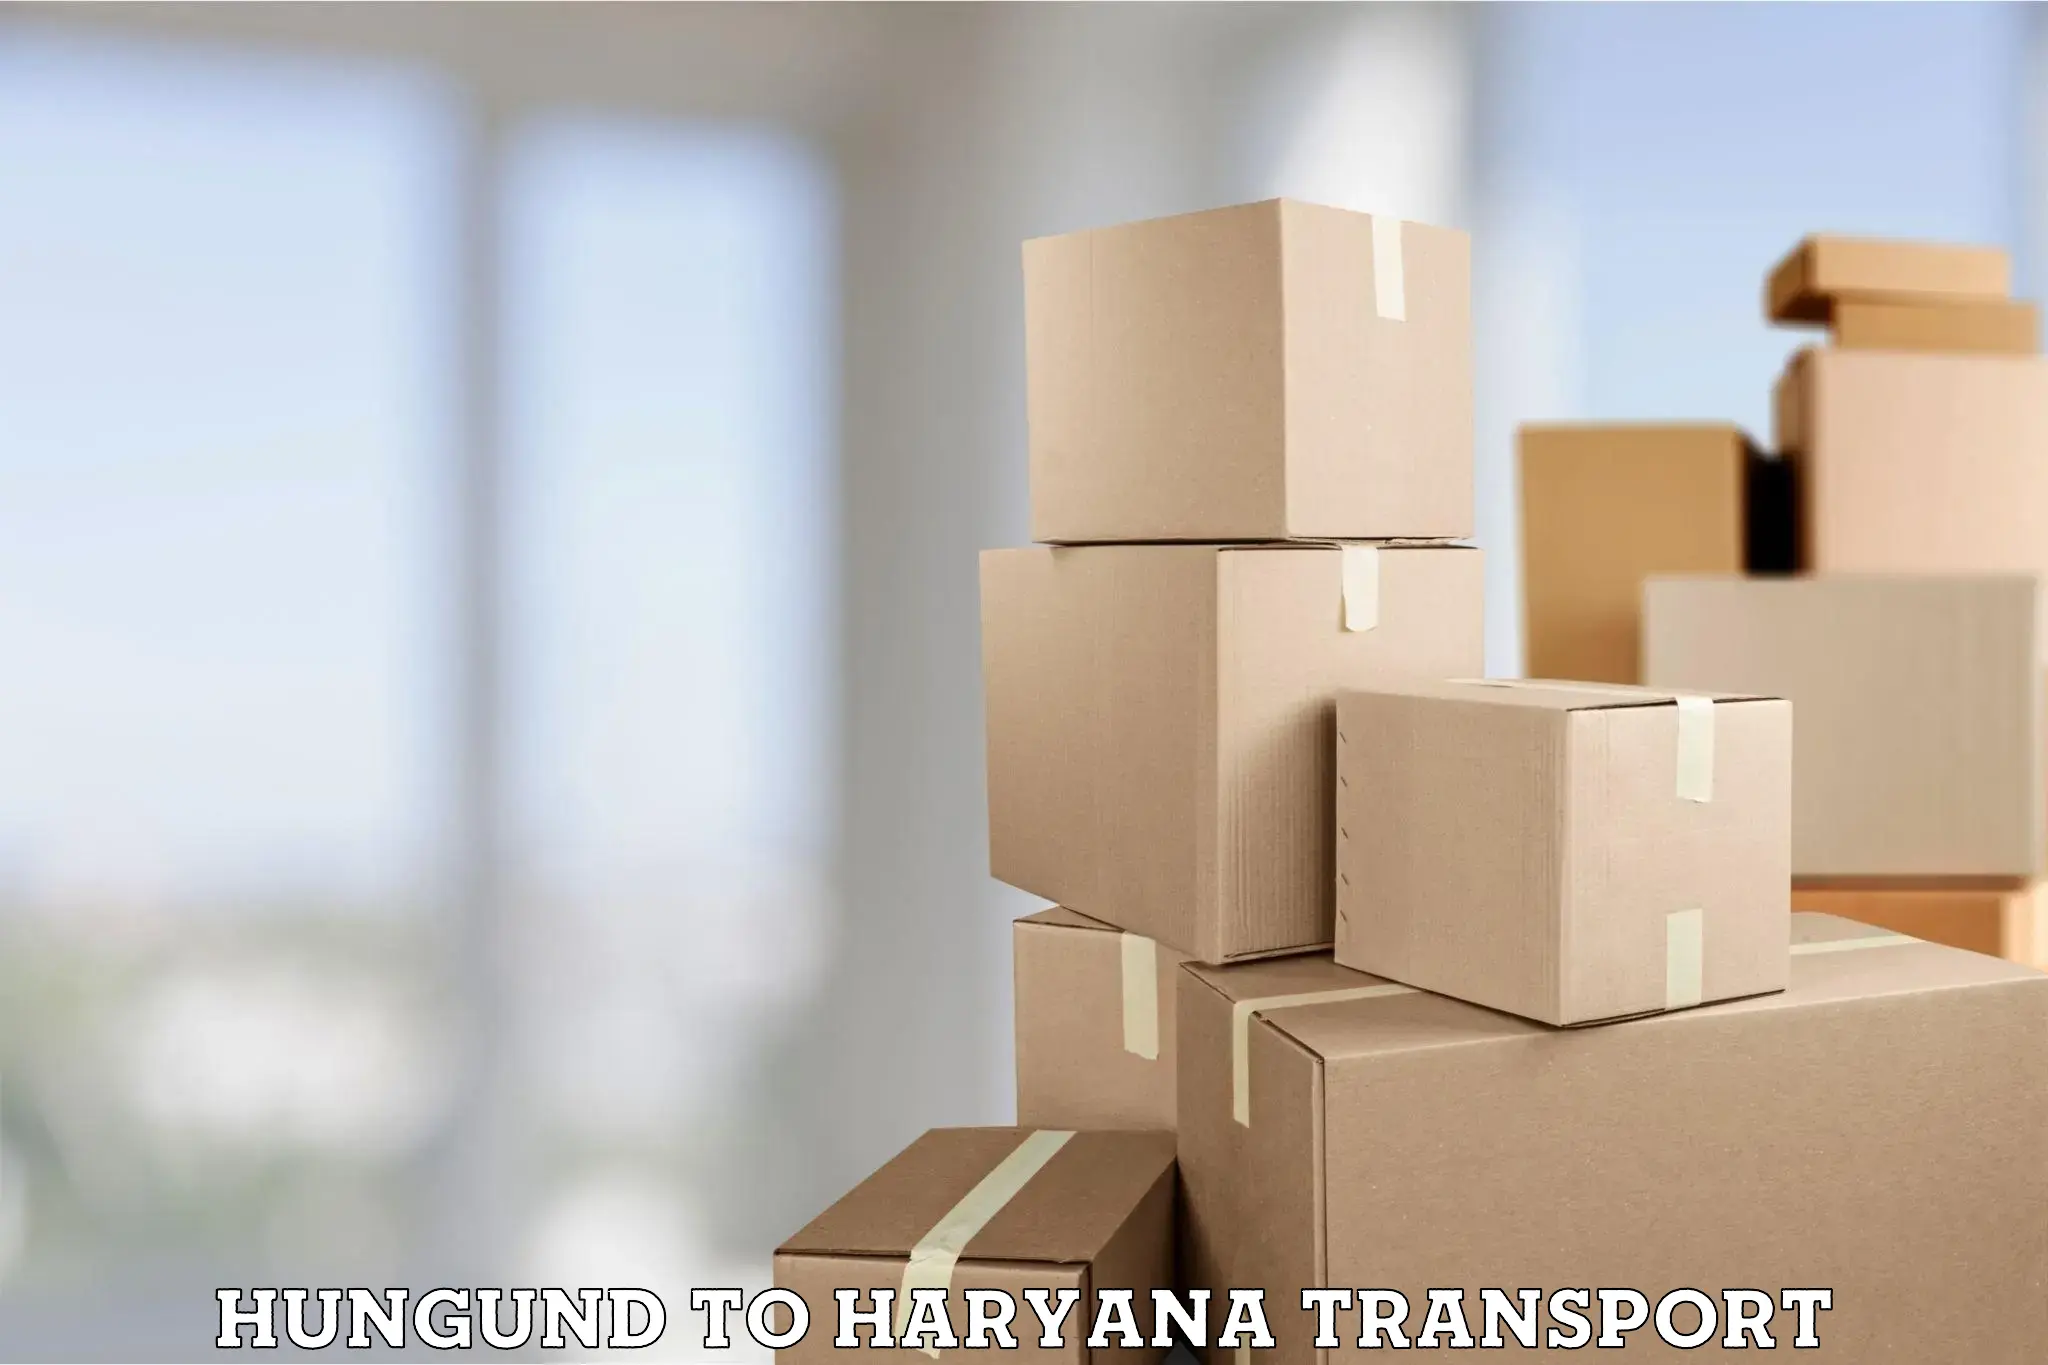 Road transport online services Hungund to Gurgaon